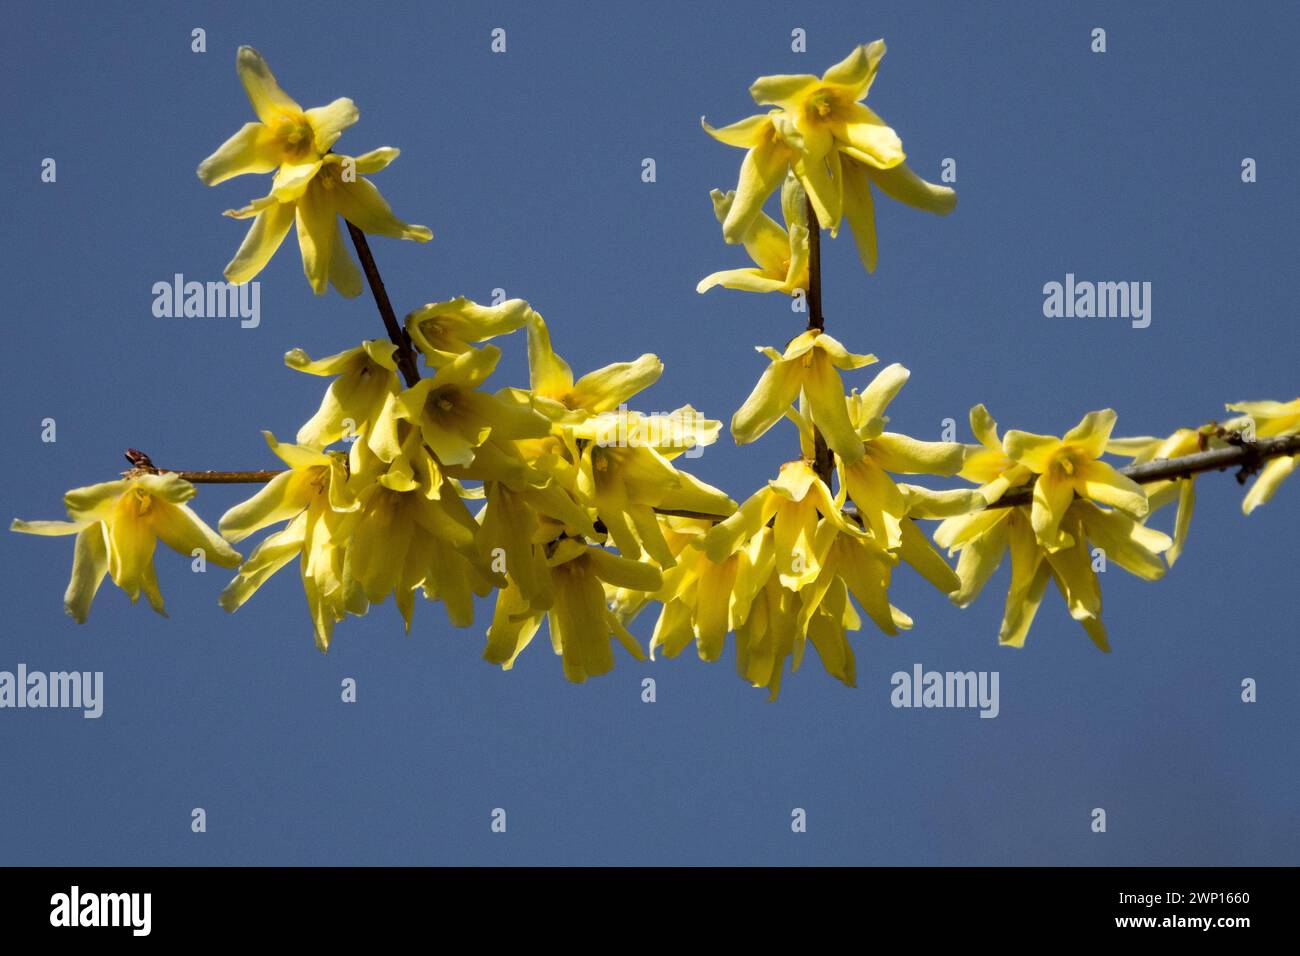 Forsythia giraldiana Flower Close-up Yellow blooms On Branch Forsythia Bloom Flowers Late Winter flowering March Blooming Twig Closeup Shrub Stock Photo